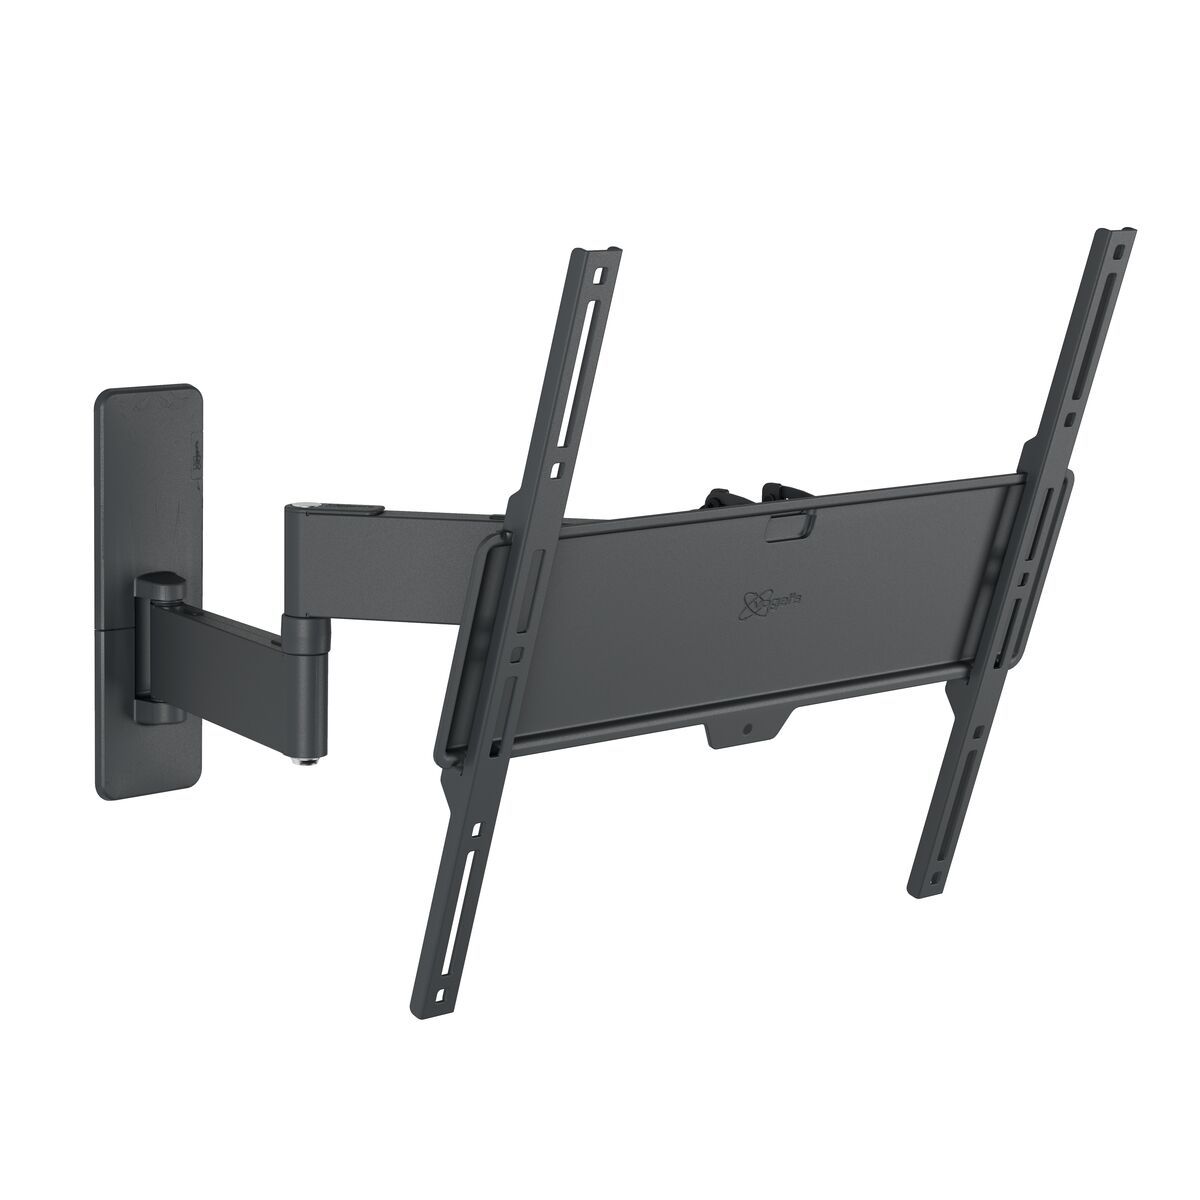 Vogel's TVM 1445 Full-Motion TV Wall Mount - Suitable for 32 up to 65 inch TVs - Full motion (up to 180°) swivel - Tilt up to 15° - Product